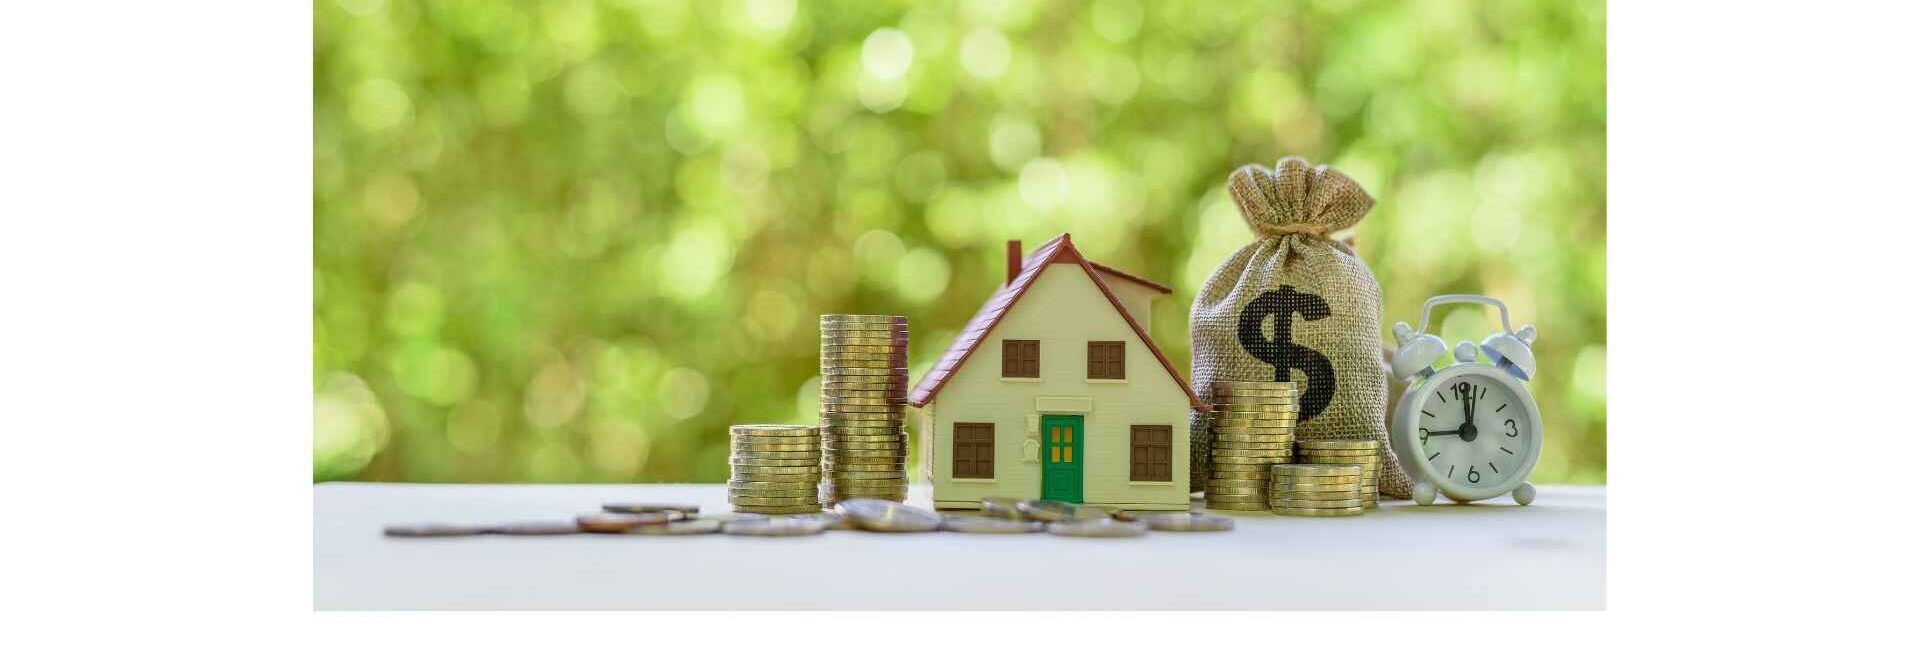 Parakh Home Solution- Expert Help With Home Loans in Noida